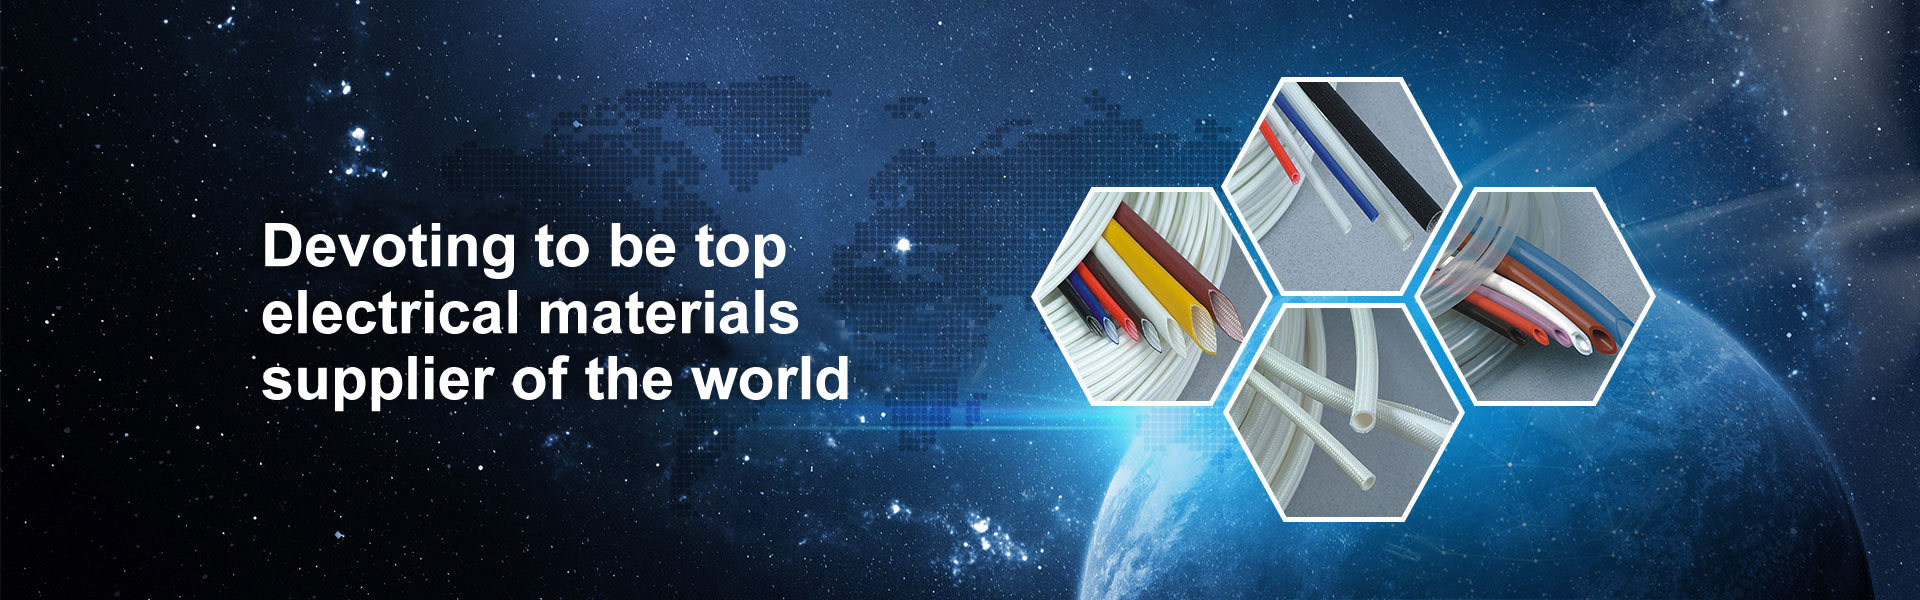 Devoting to be top electrical materials supplier of the world